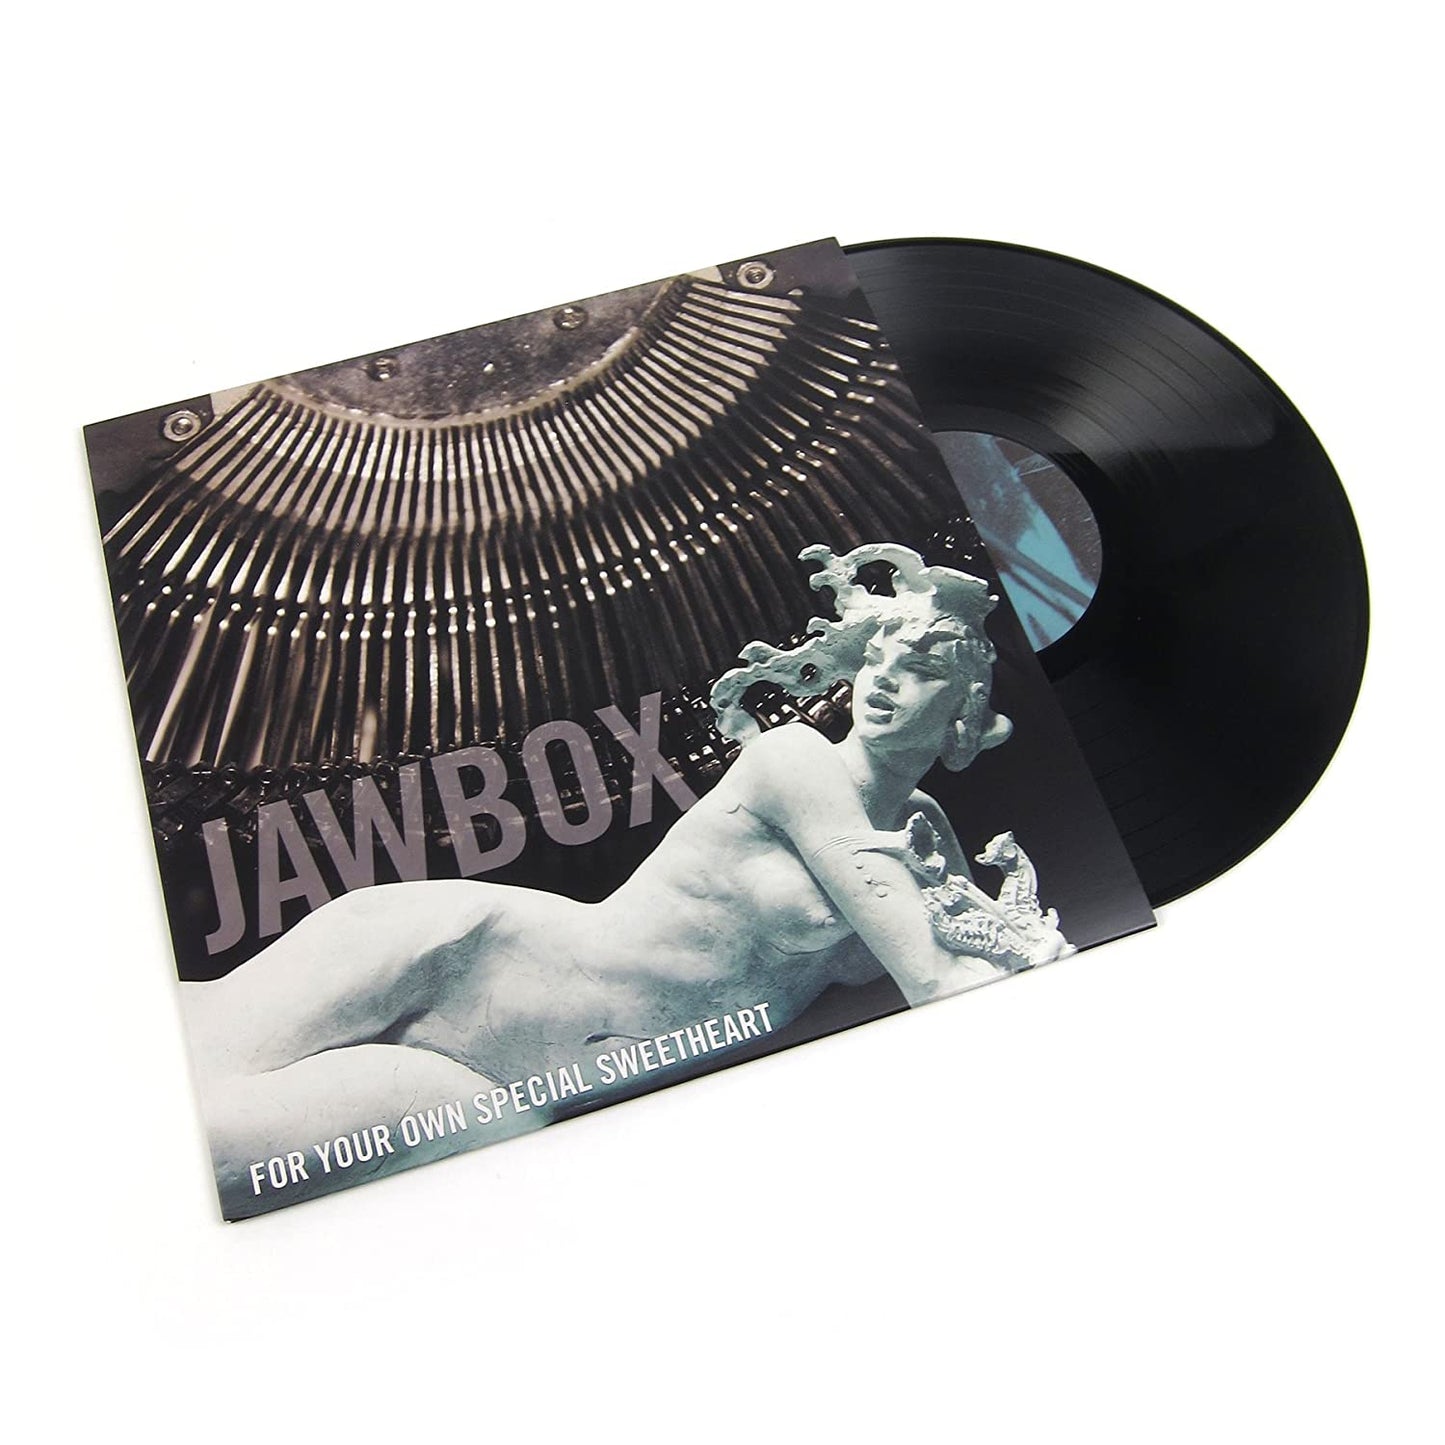 Jawbox - For Your Own Special Sweetheart (Black Vinyl)